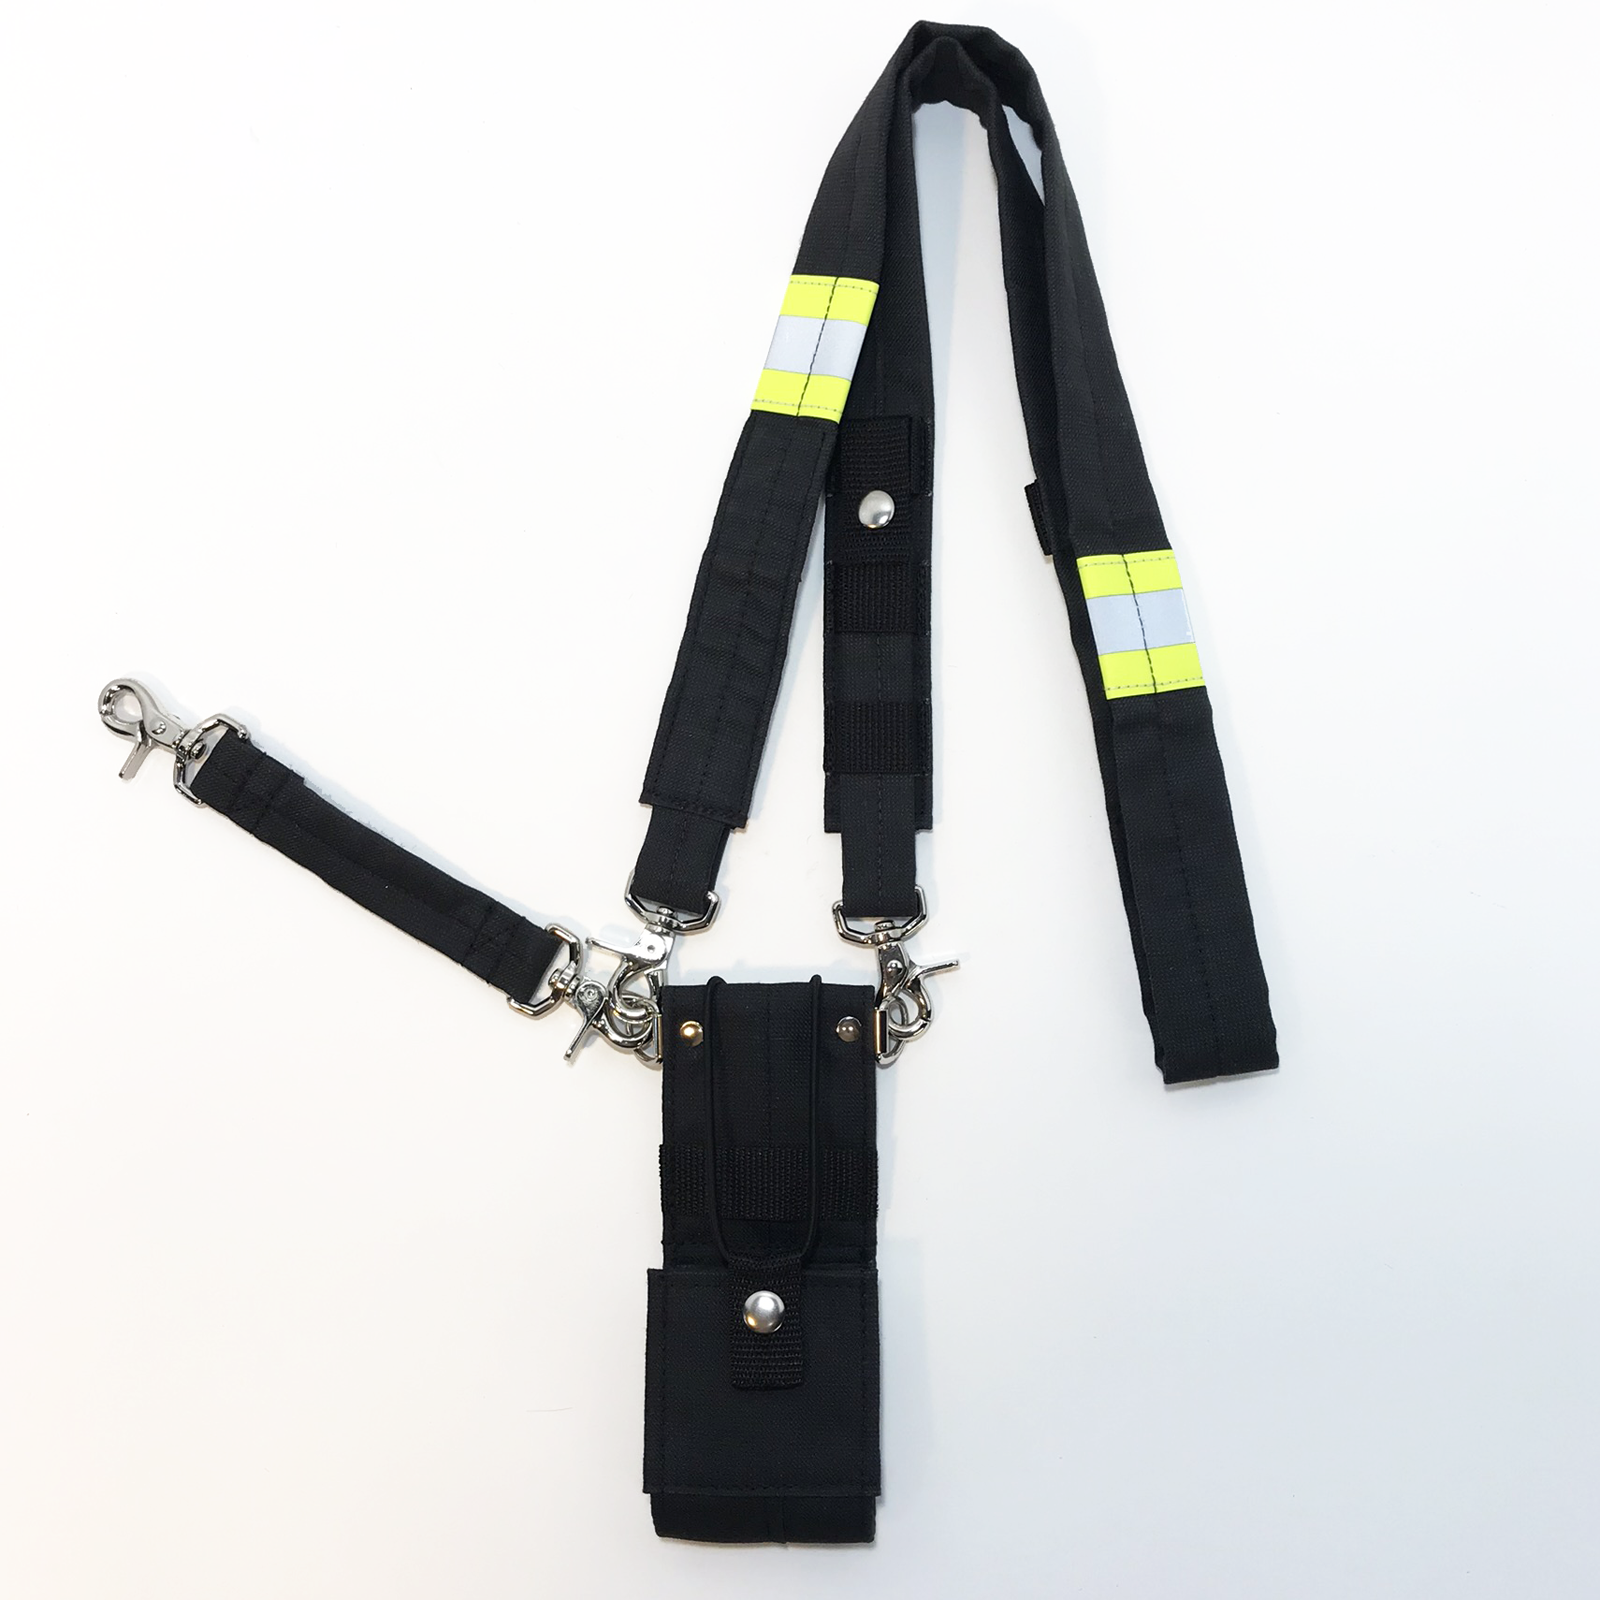 Bunker Gear Radio Strap System in Black with Yellow Trim